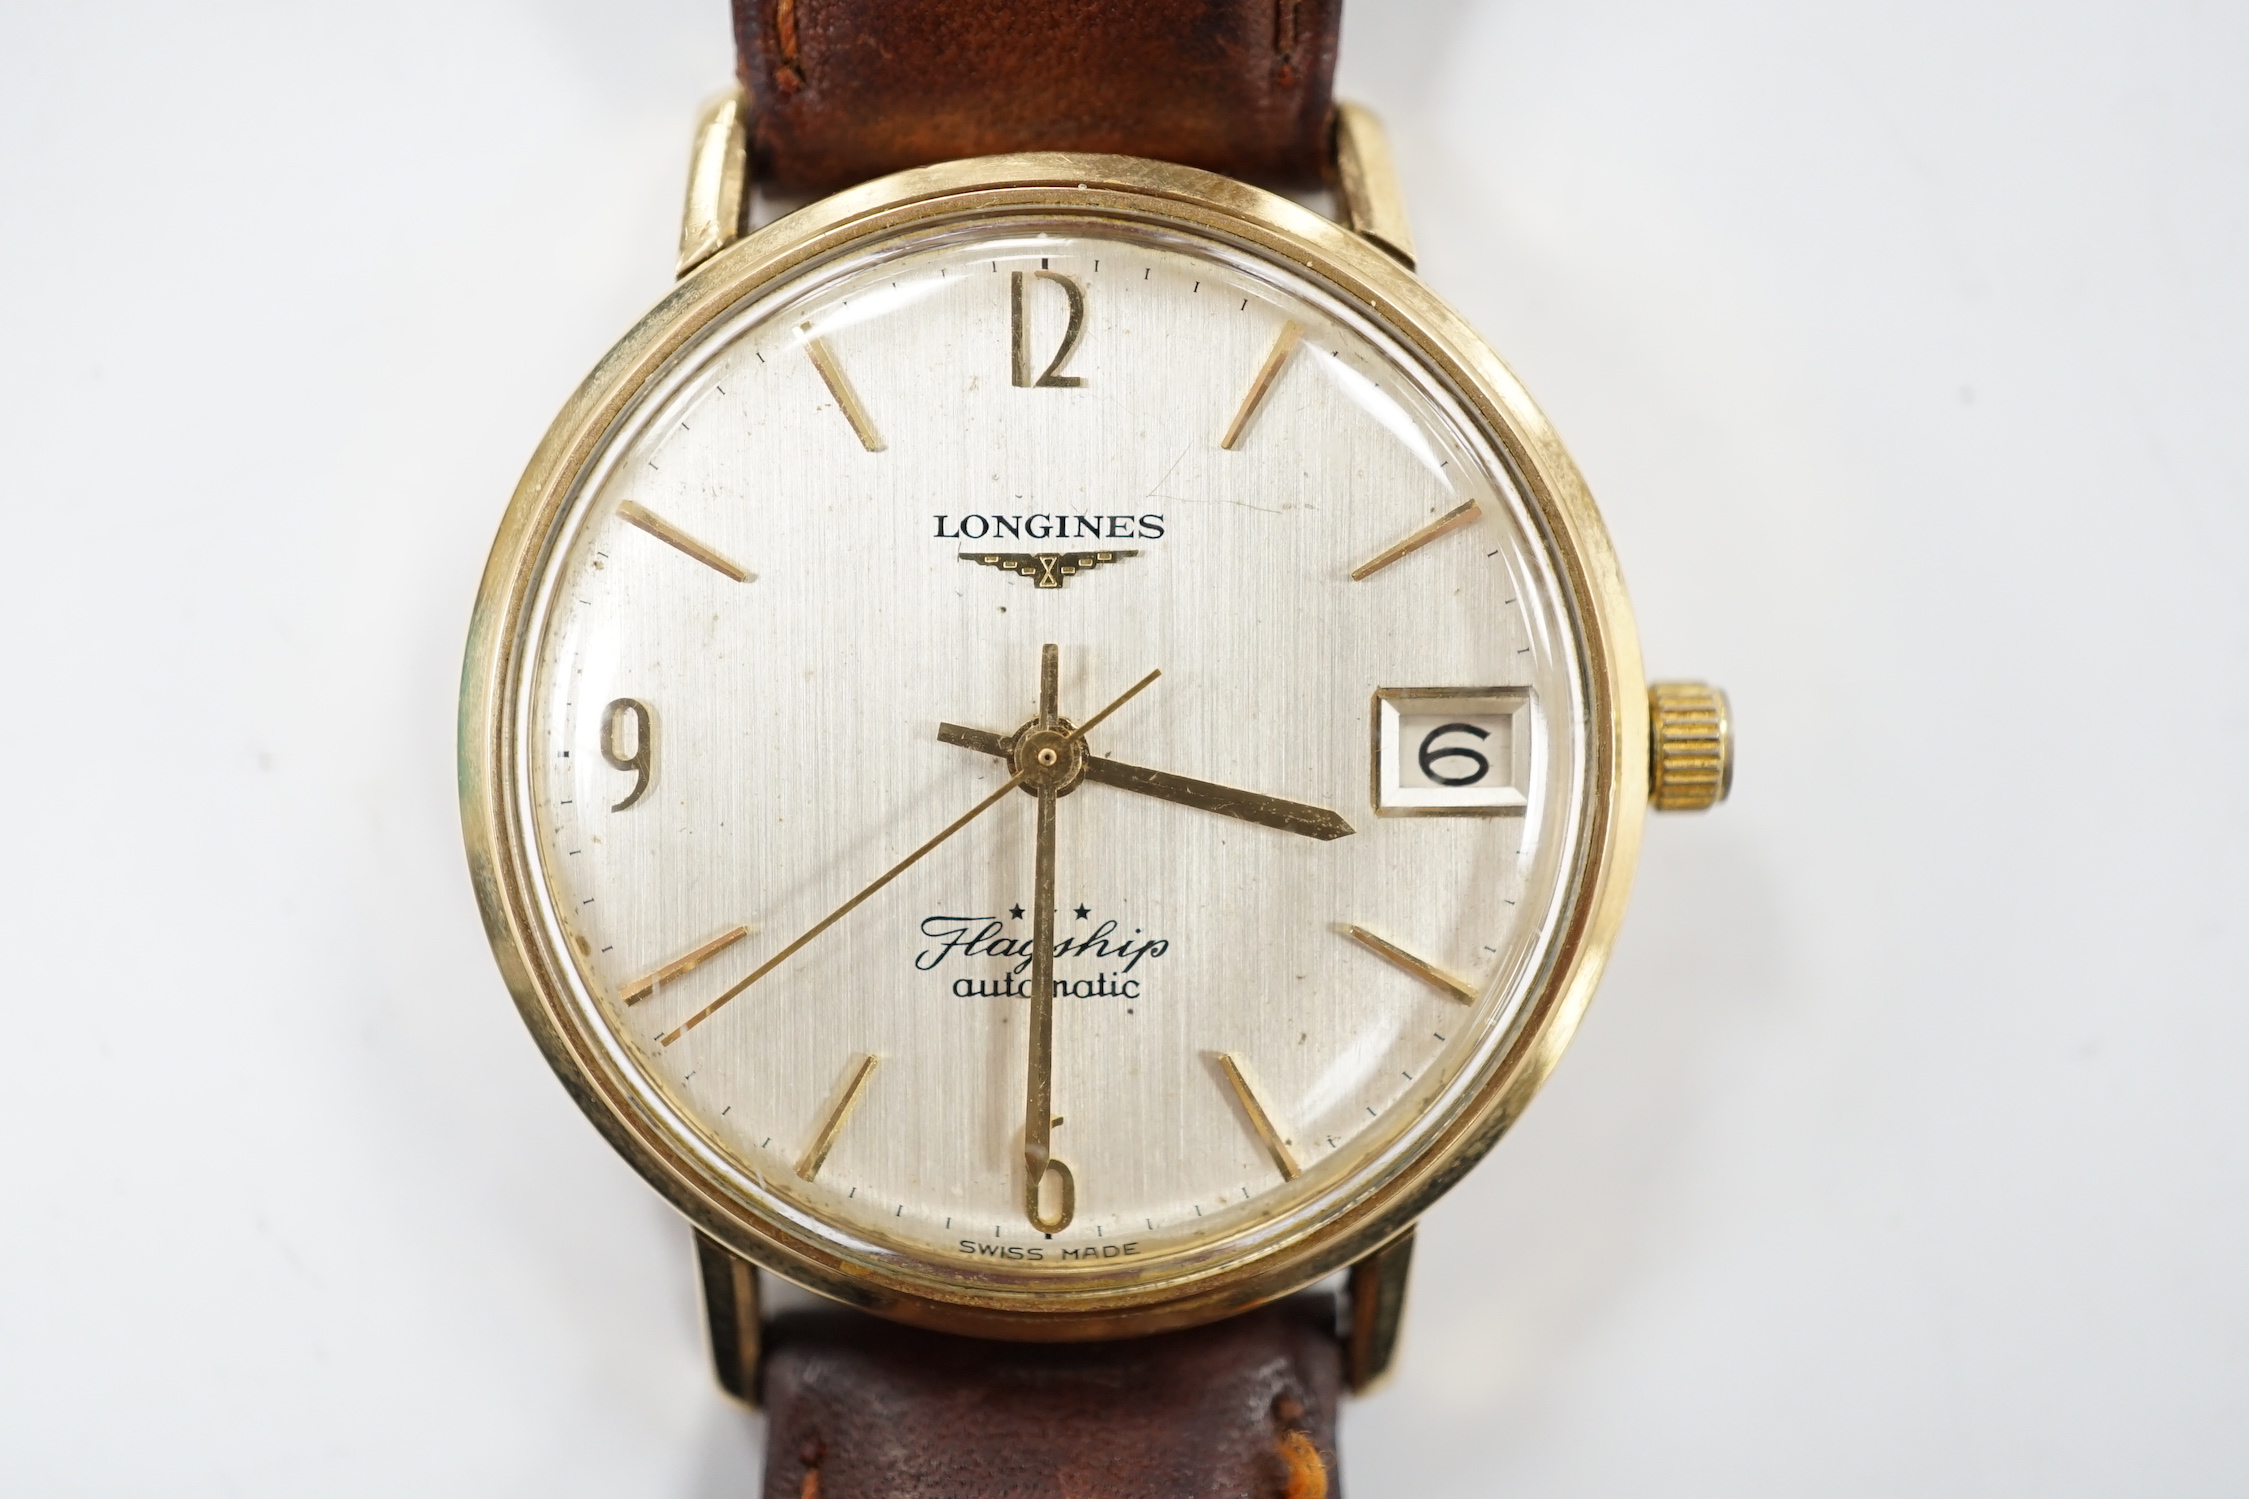 A gentleman's 9ct gold Longines Flagship automatic wrist watch, with baton numerals and date aperture, on associated leather strap.